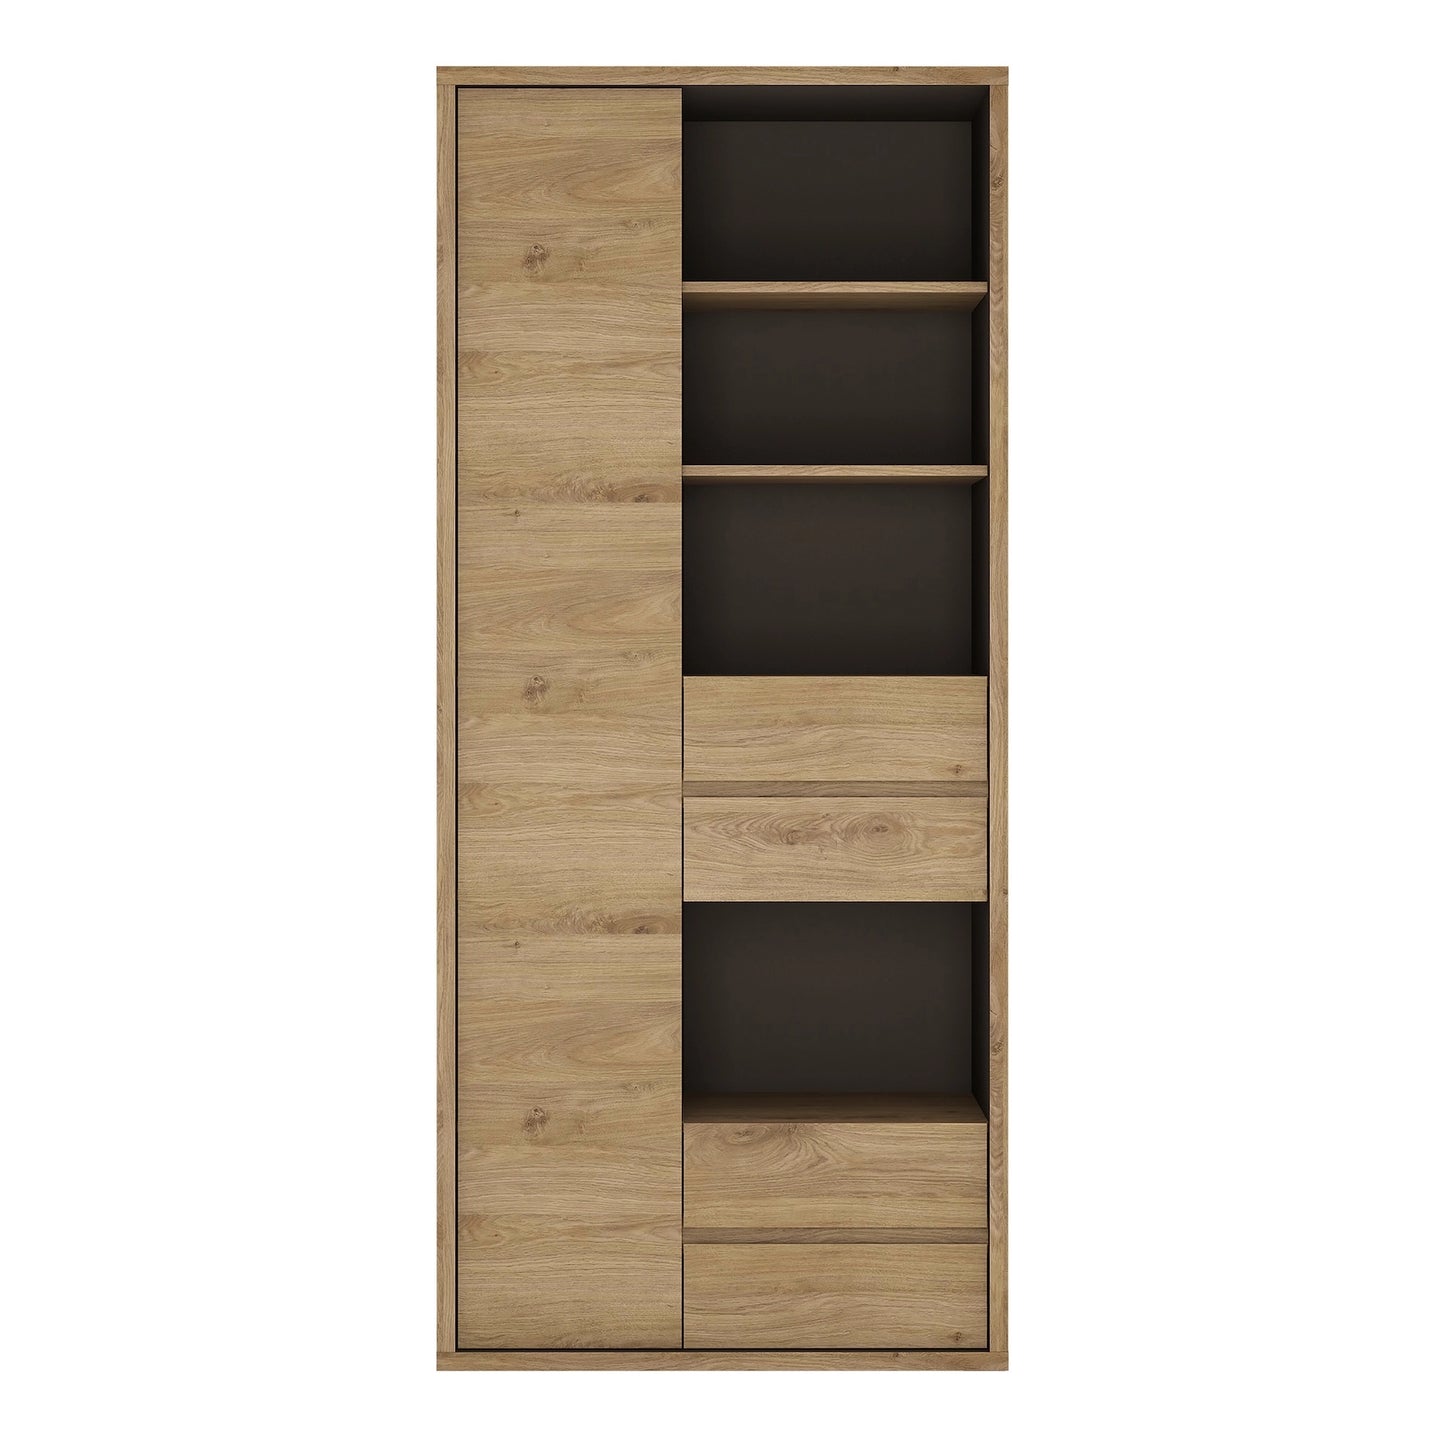 Furniture To Go Shetland Tall Wide 1 Door 4 Drawer Bookcase